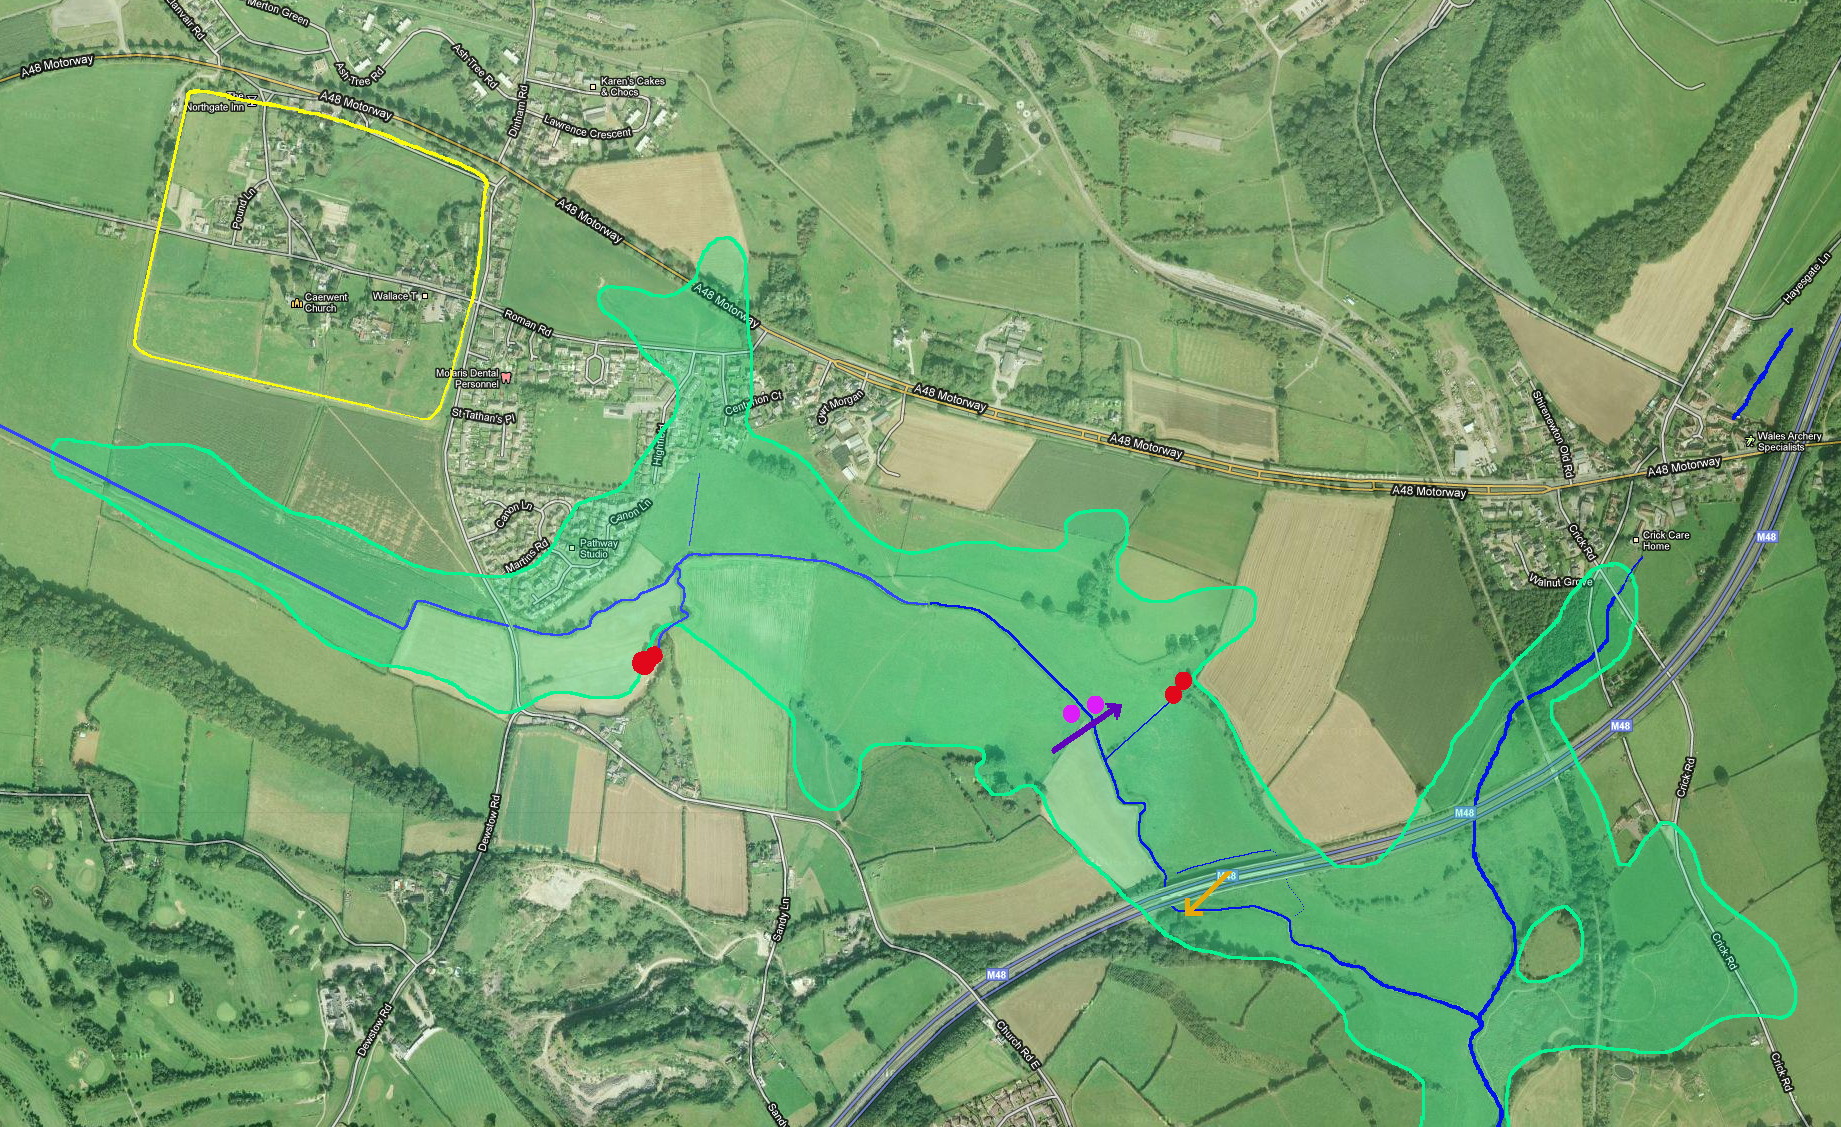 aerial view of the area around Caerwent, with the course of the Troggy Brook and the positions of the Whirlyholes marked